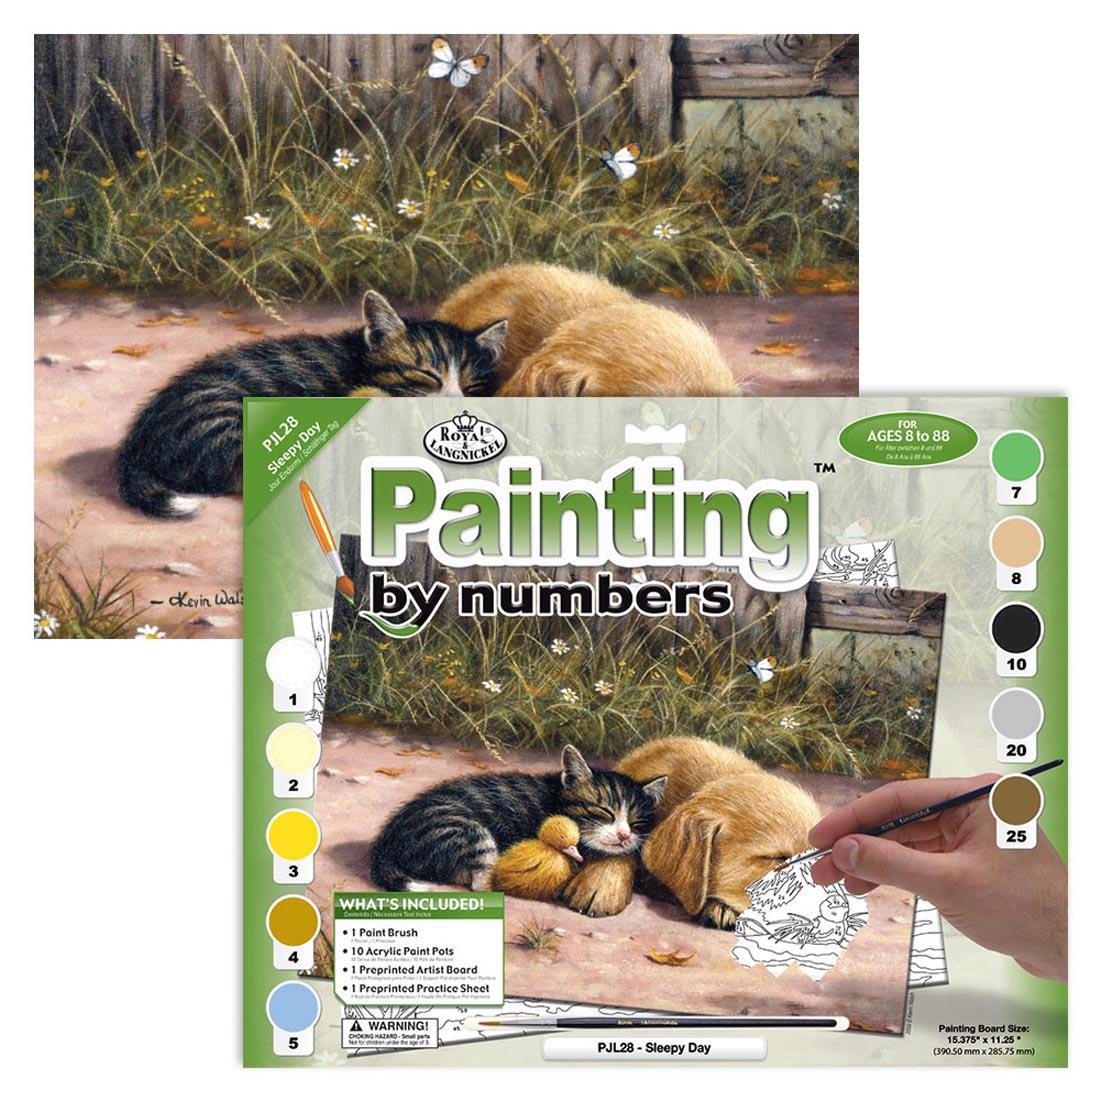 Royal & Langnickel Painting By Numbers Junior Large: Sleepy Day in the package with the completed picture of sleeping cat and dog behind it